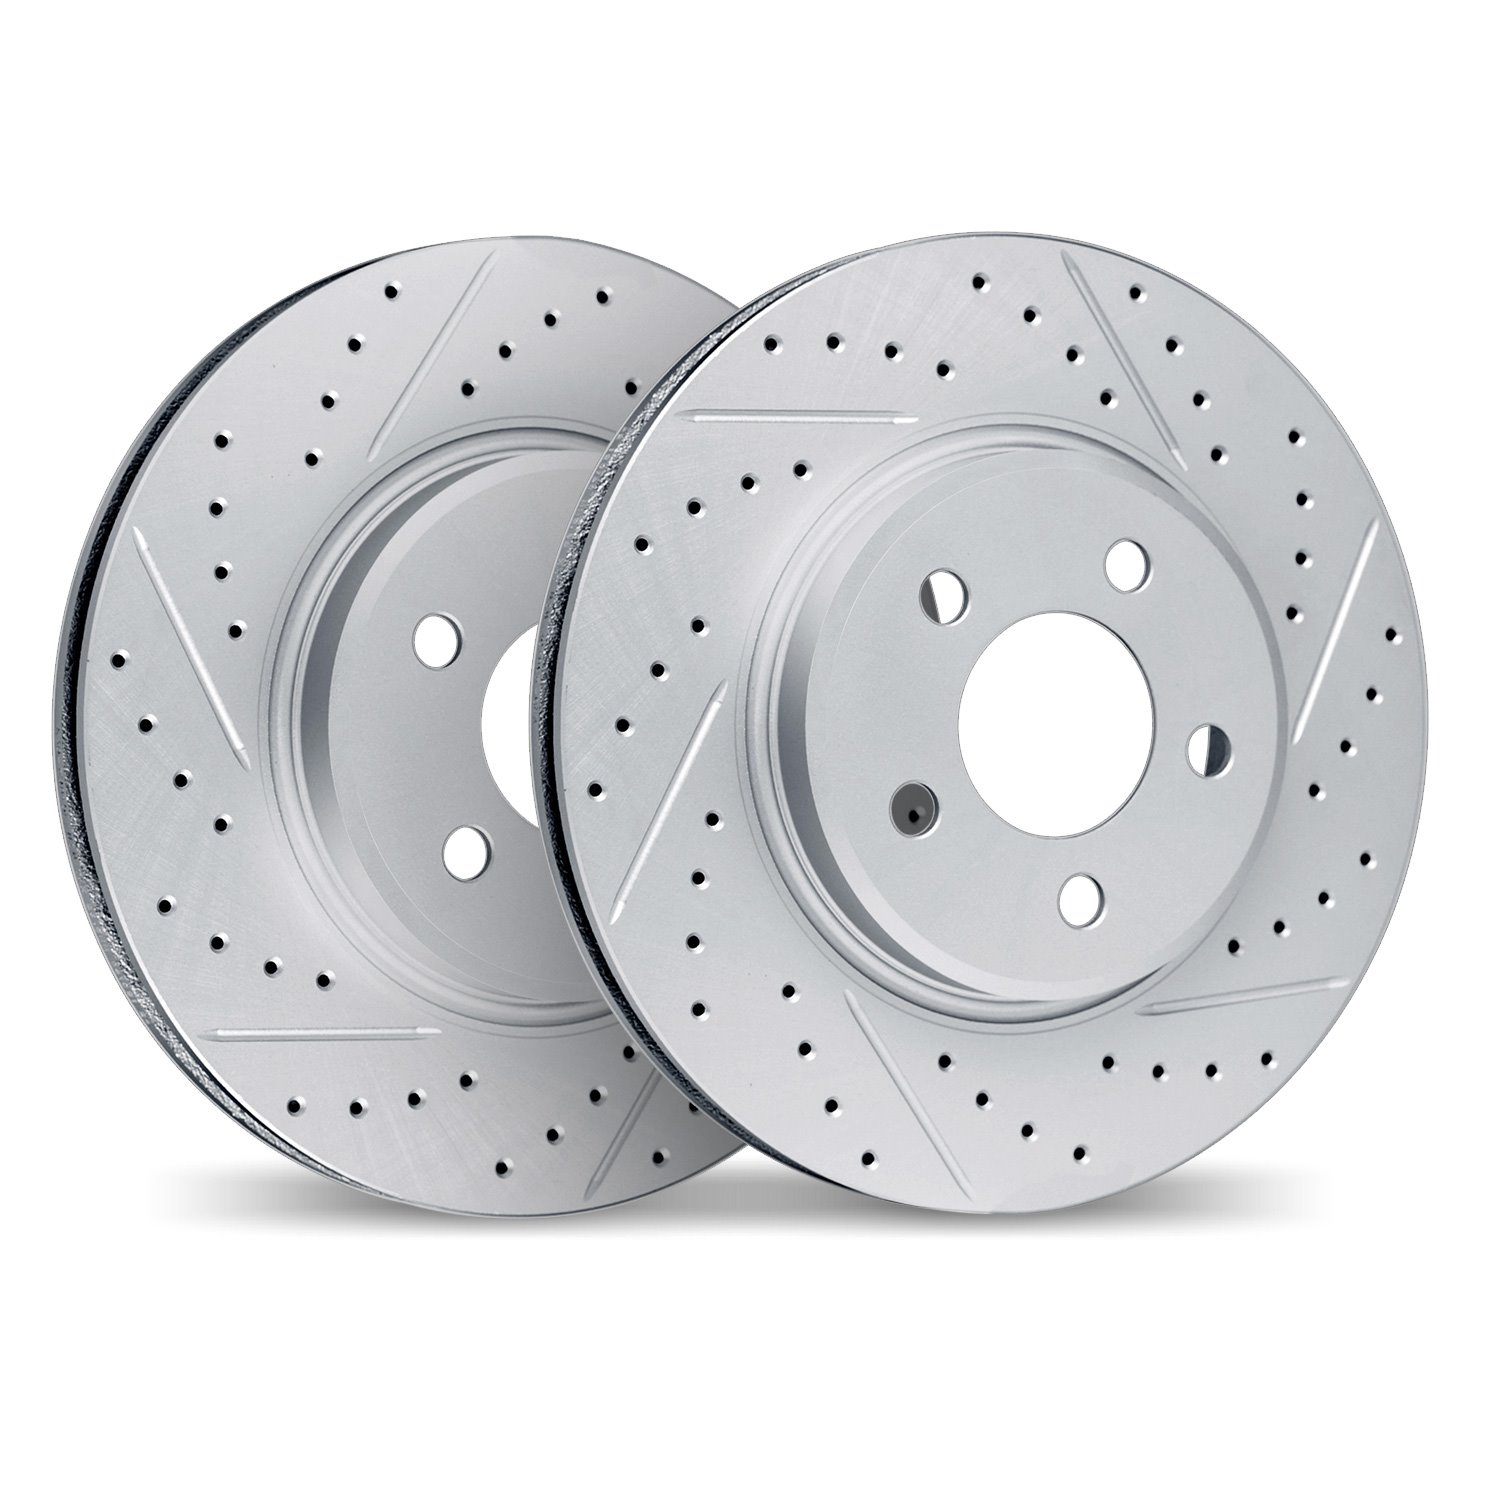 2002-54050 Geoperformance Drilled/Slotted Brake Rotors, 1997-1999 Ford/Lincoln/Mercury/Mazda, Position: Front